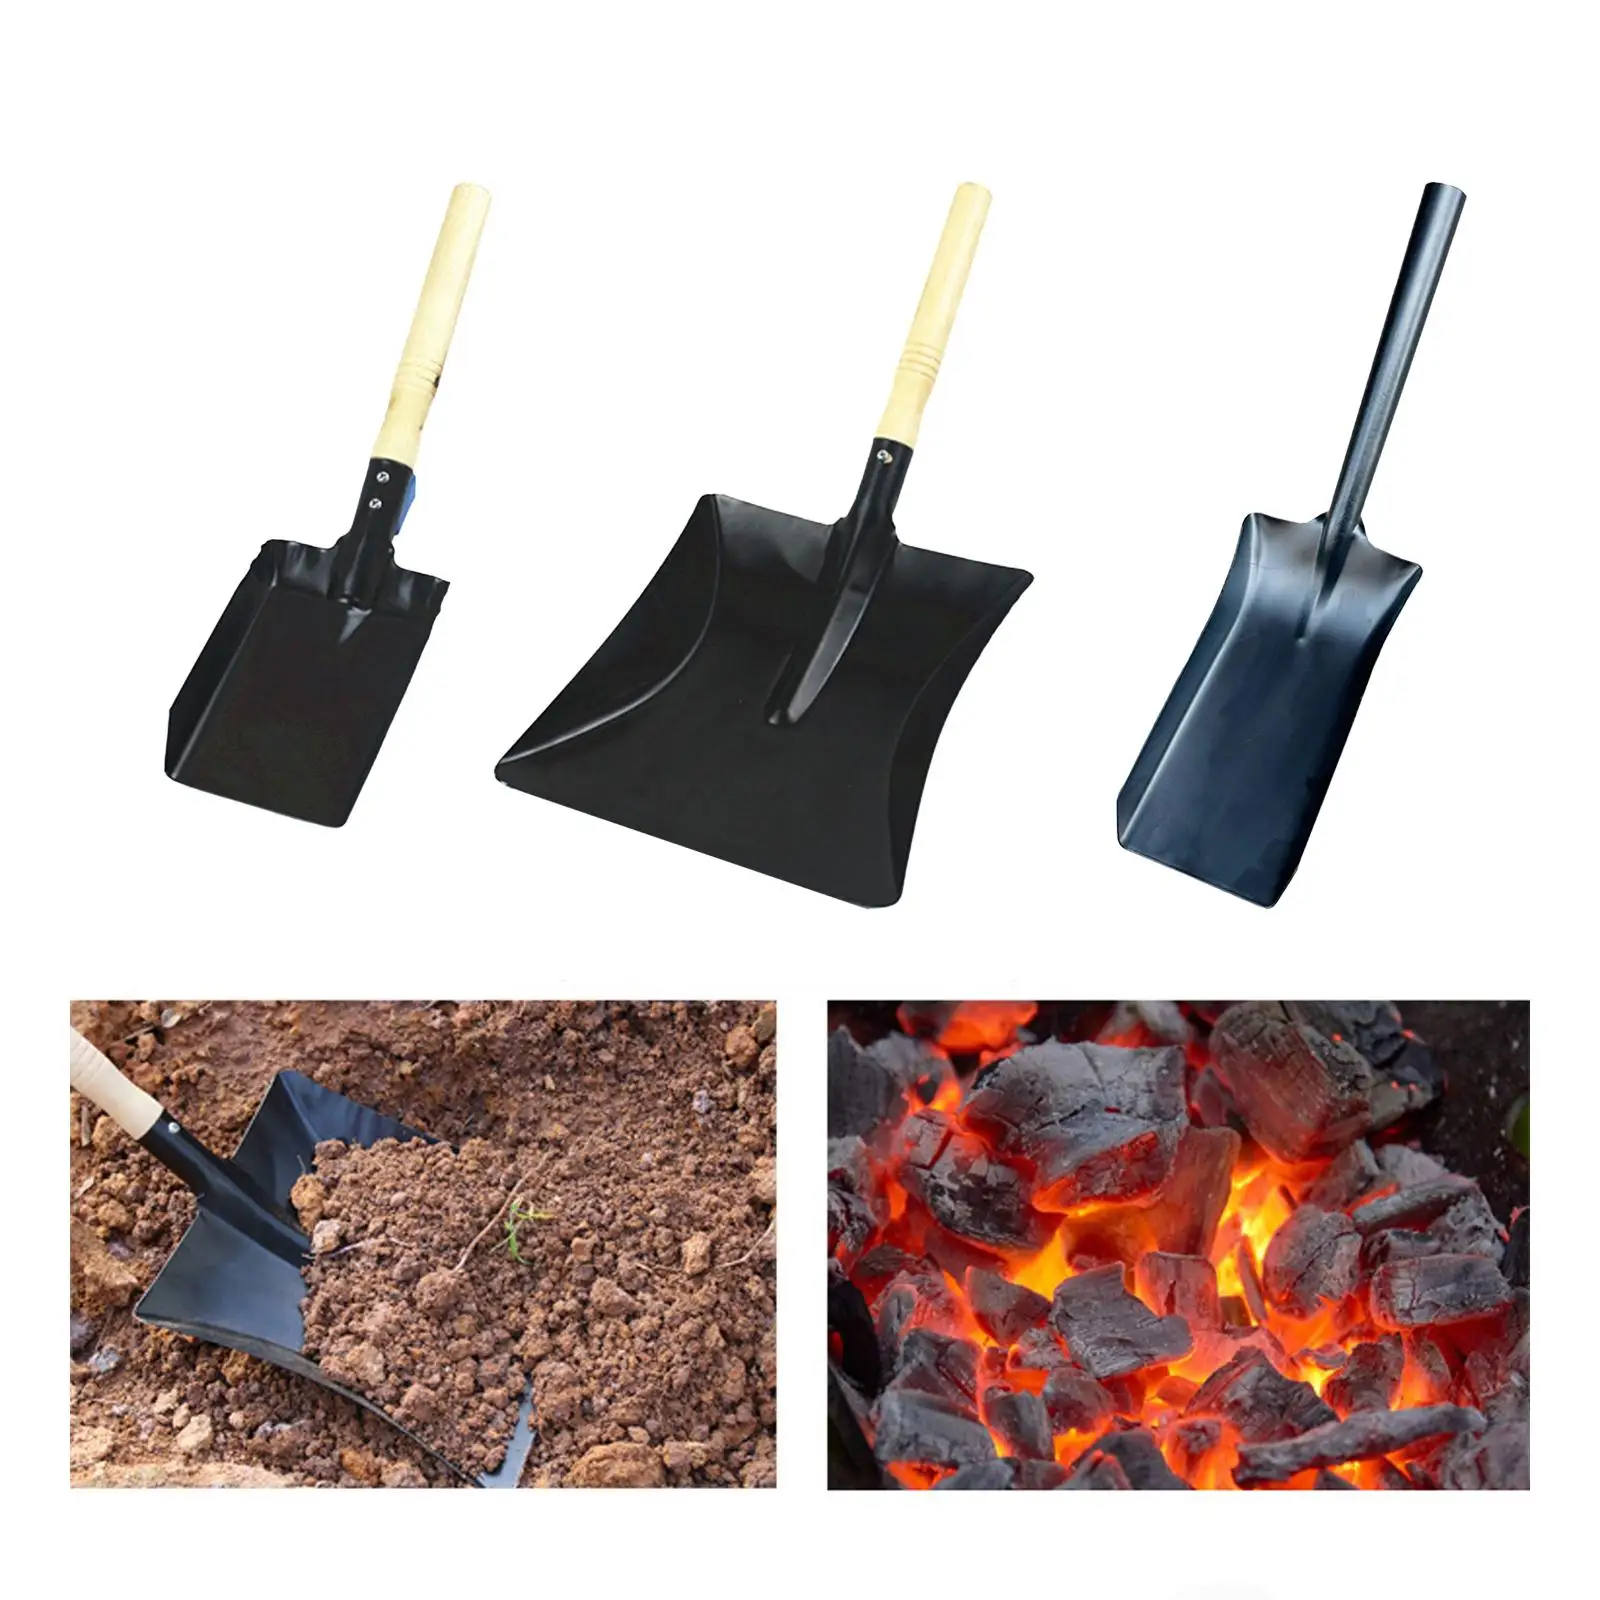 Multifunctional Shovel Iorn Gear Garden Camping Axe Tools Emergency Portable Saw Household Commodity Parts Indoor Chimney Shovel